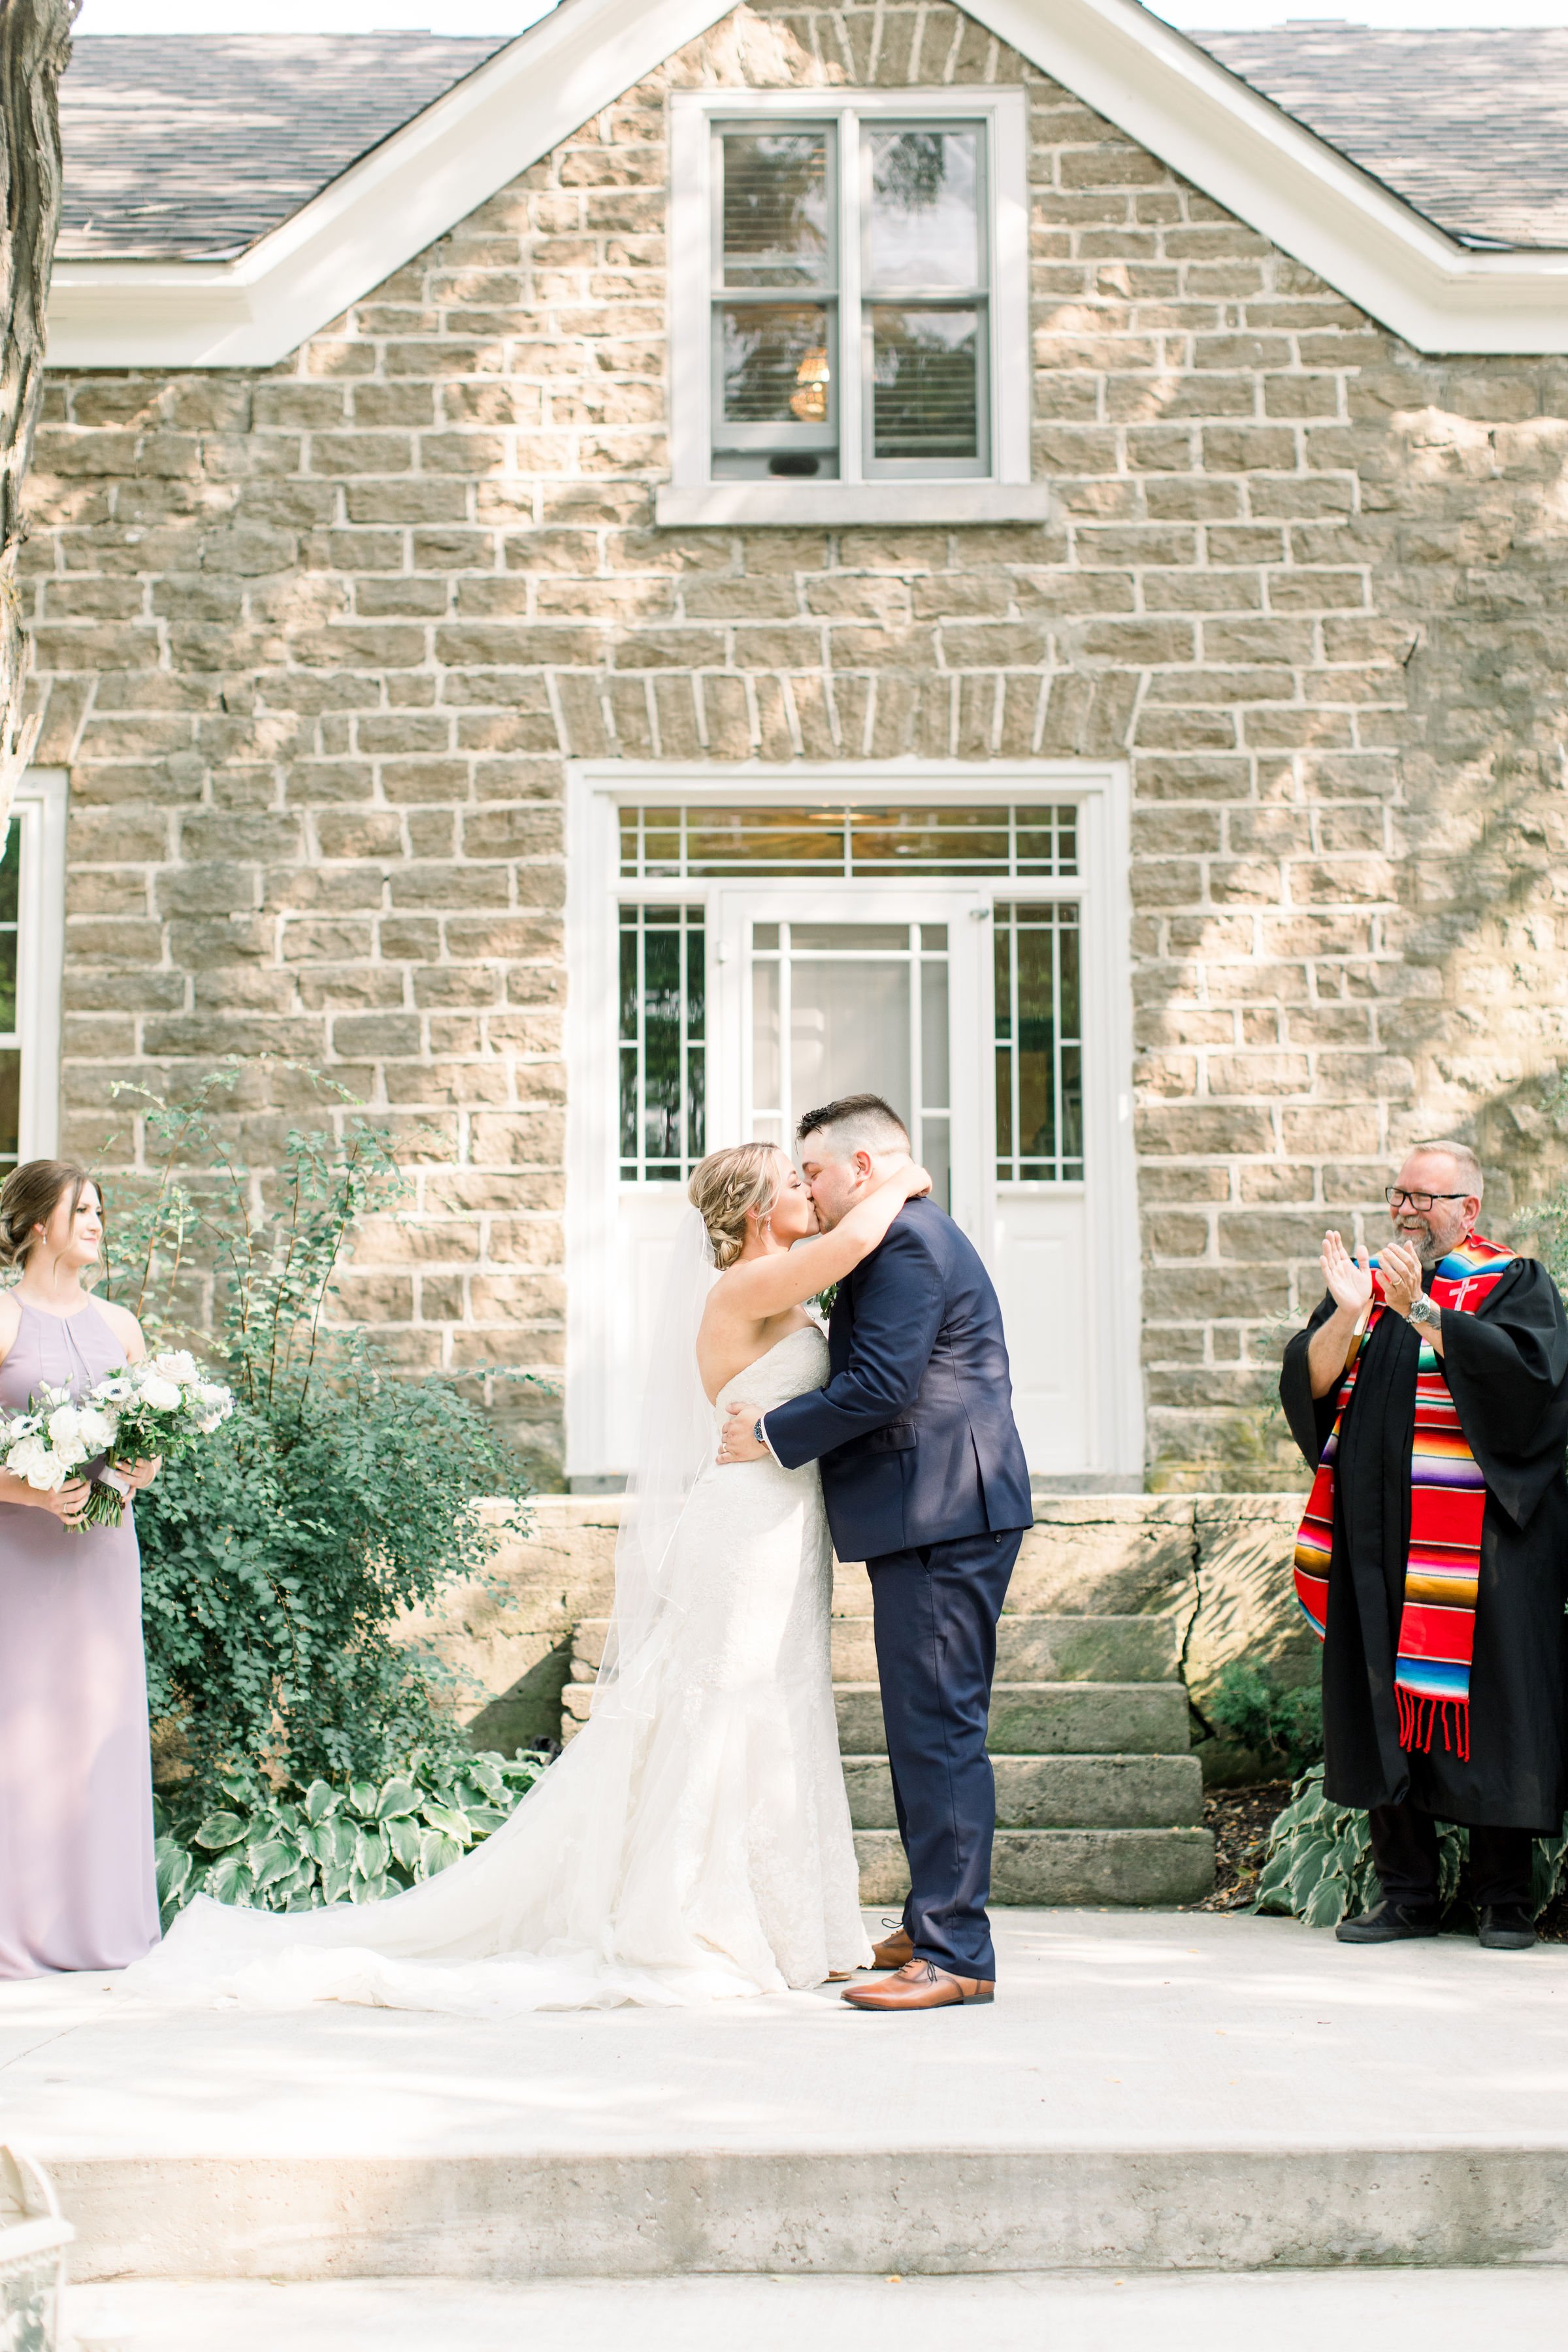  At Stonefield Estates a newlywed couple kiss at the altar captured by Chelsea Mason Photography. newlyweds kiss stone building #StonefieldEstates #Ontarioweddings #Chelseamasonphotography #Chelseamasonengagements #Ontarioweddingphotographers 